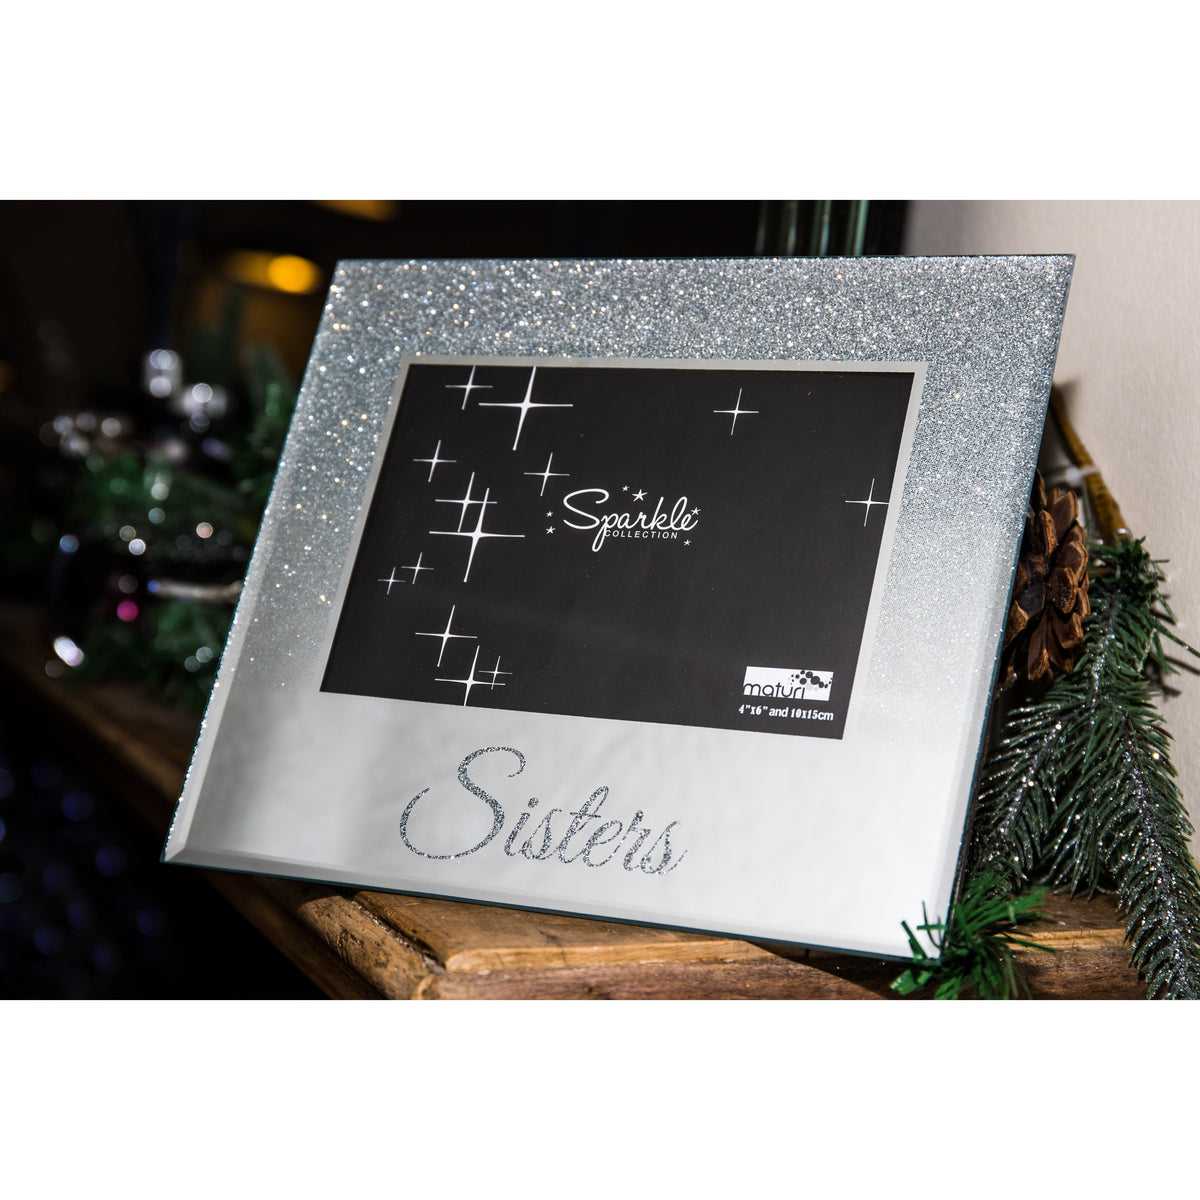 Sisters Mirrored Silver Glitter 6 x 4 Inch Photo Frame